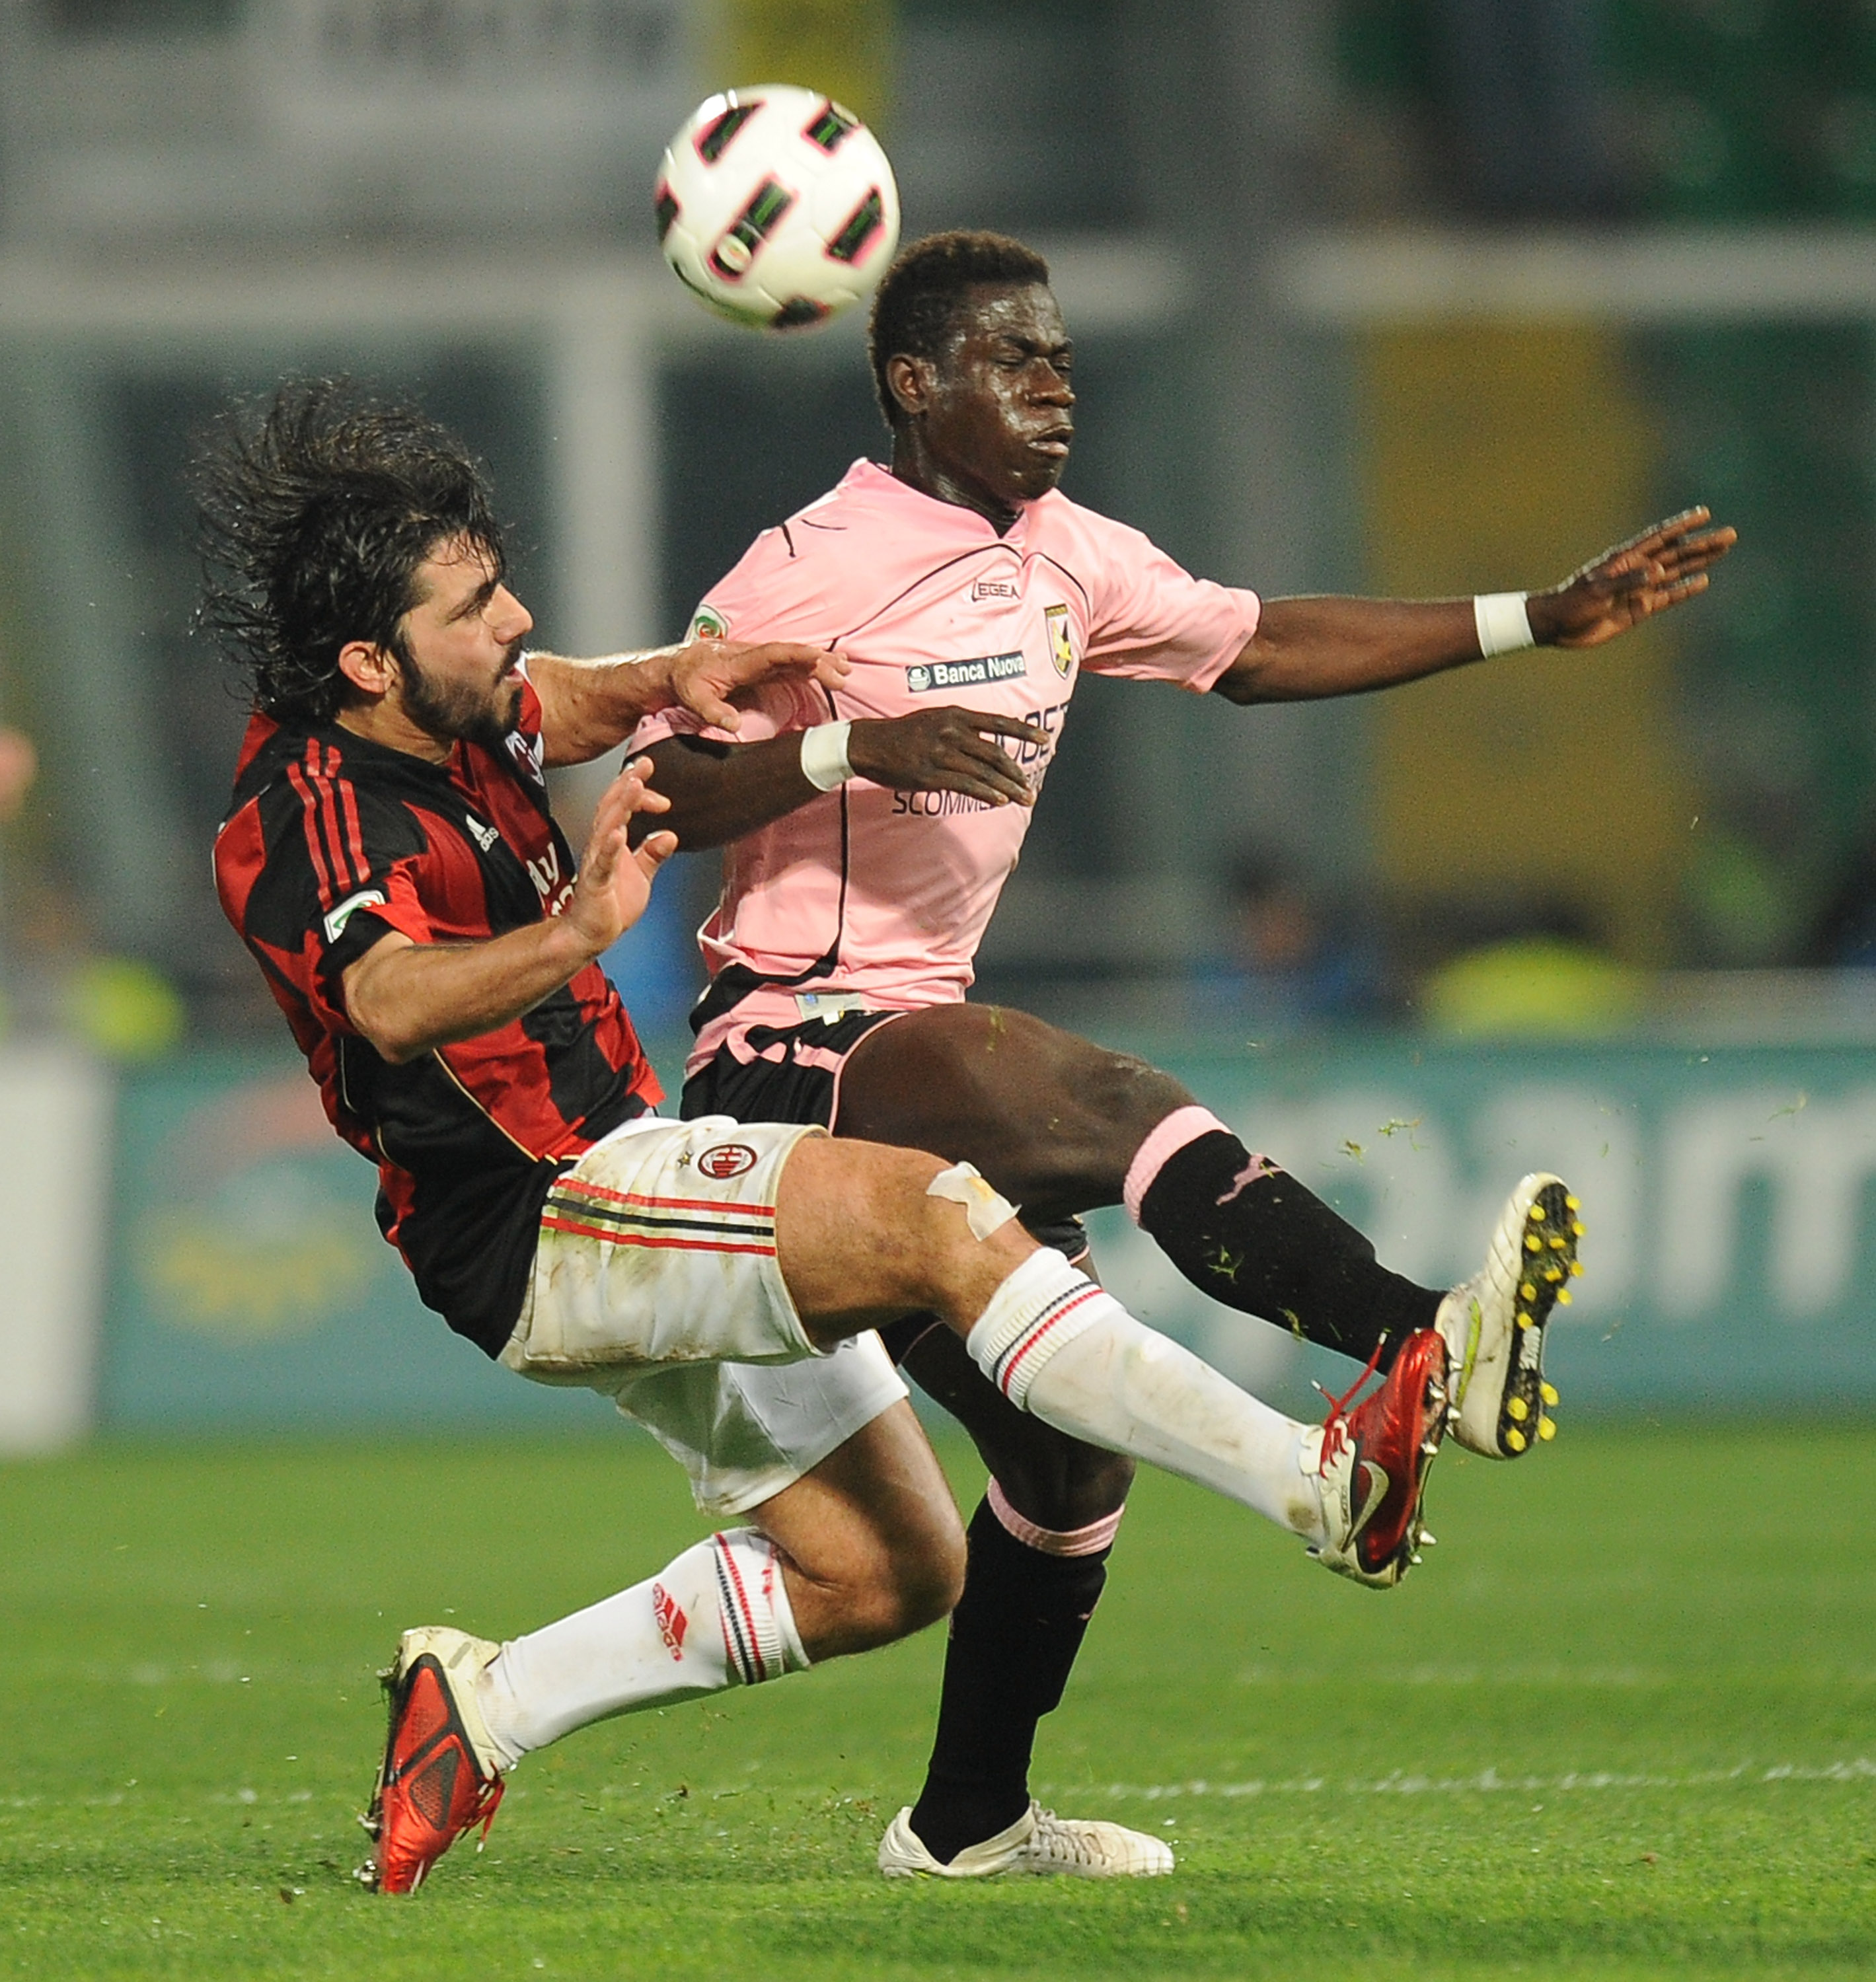 PALERMO, ITALY - MARCH 19:  Gennaro Gattuso (L) of Milan and Afriyie Acquah of Palermo compete for the ball during the Serie A match between US Citta di Palermo and AC Milan at Stadio Renzo Barbera on March 19, 2011 in Palermo, Italy.  (Photo by Tullio M.